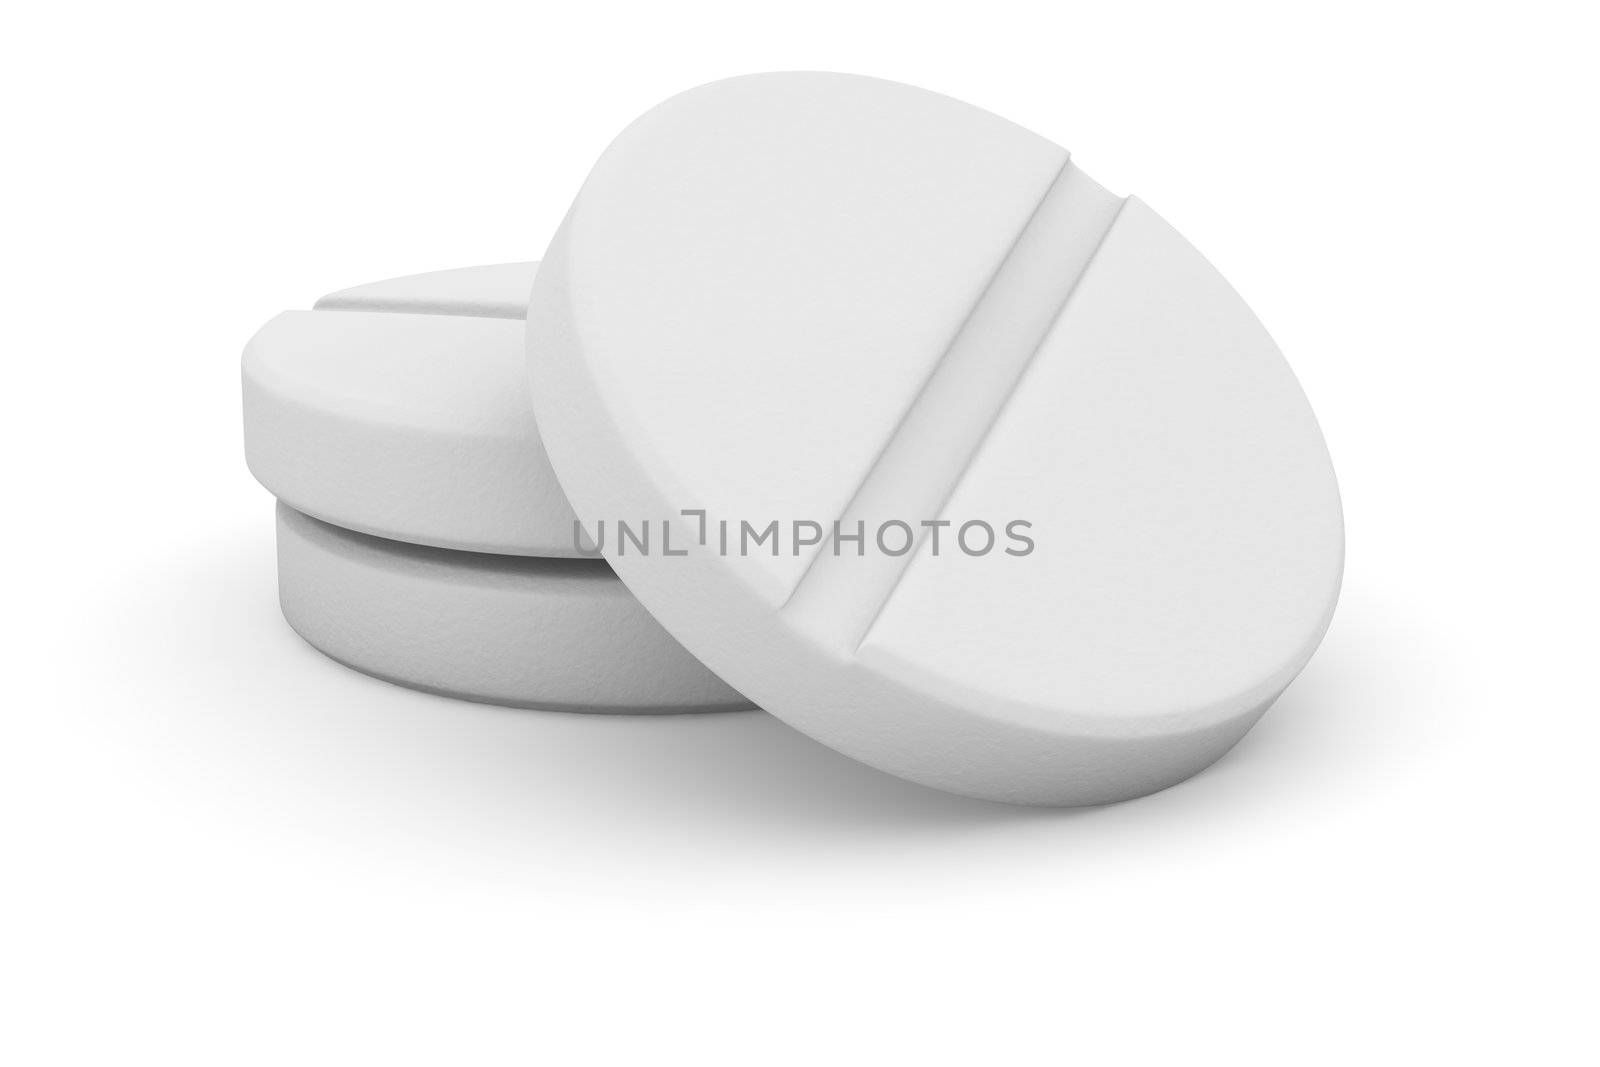 Three tablets of round shape